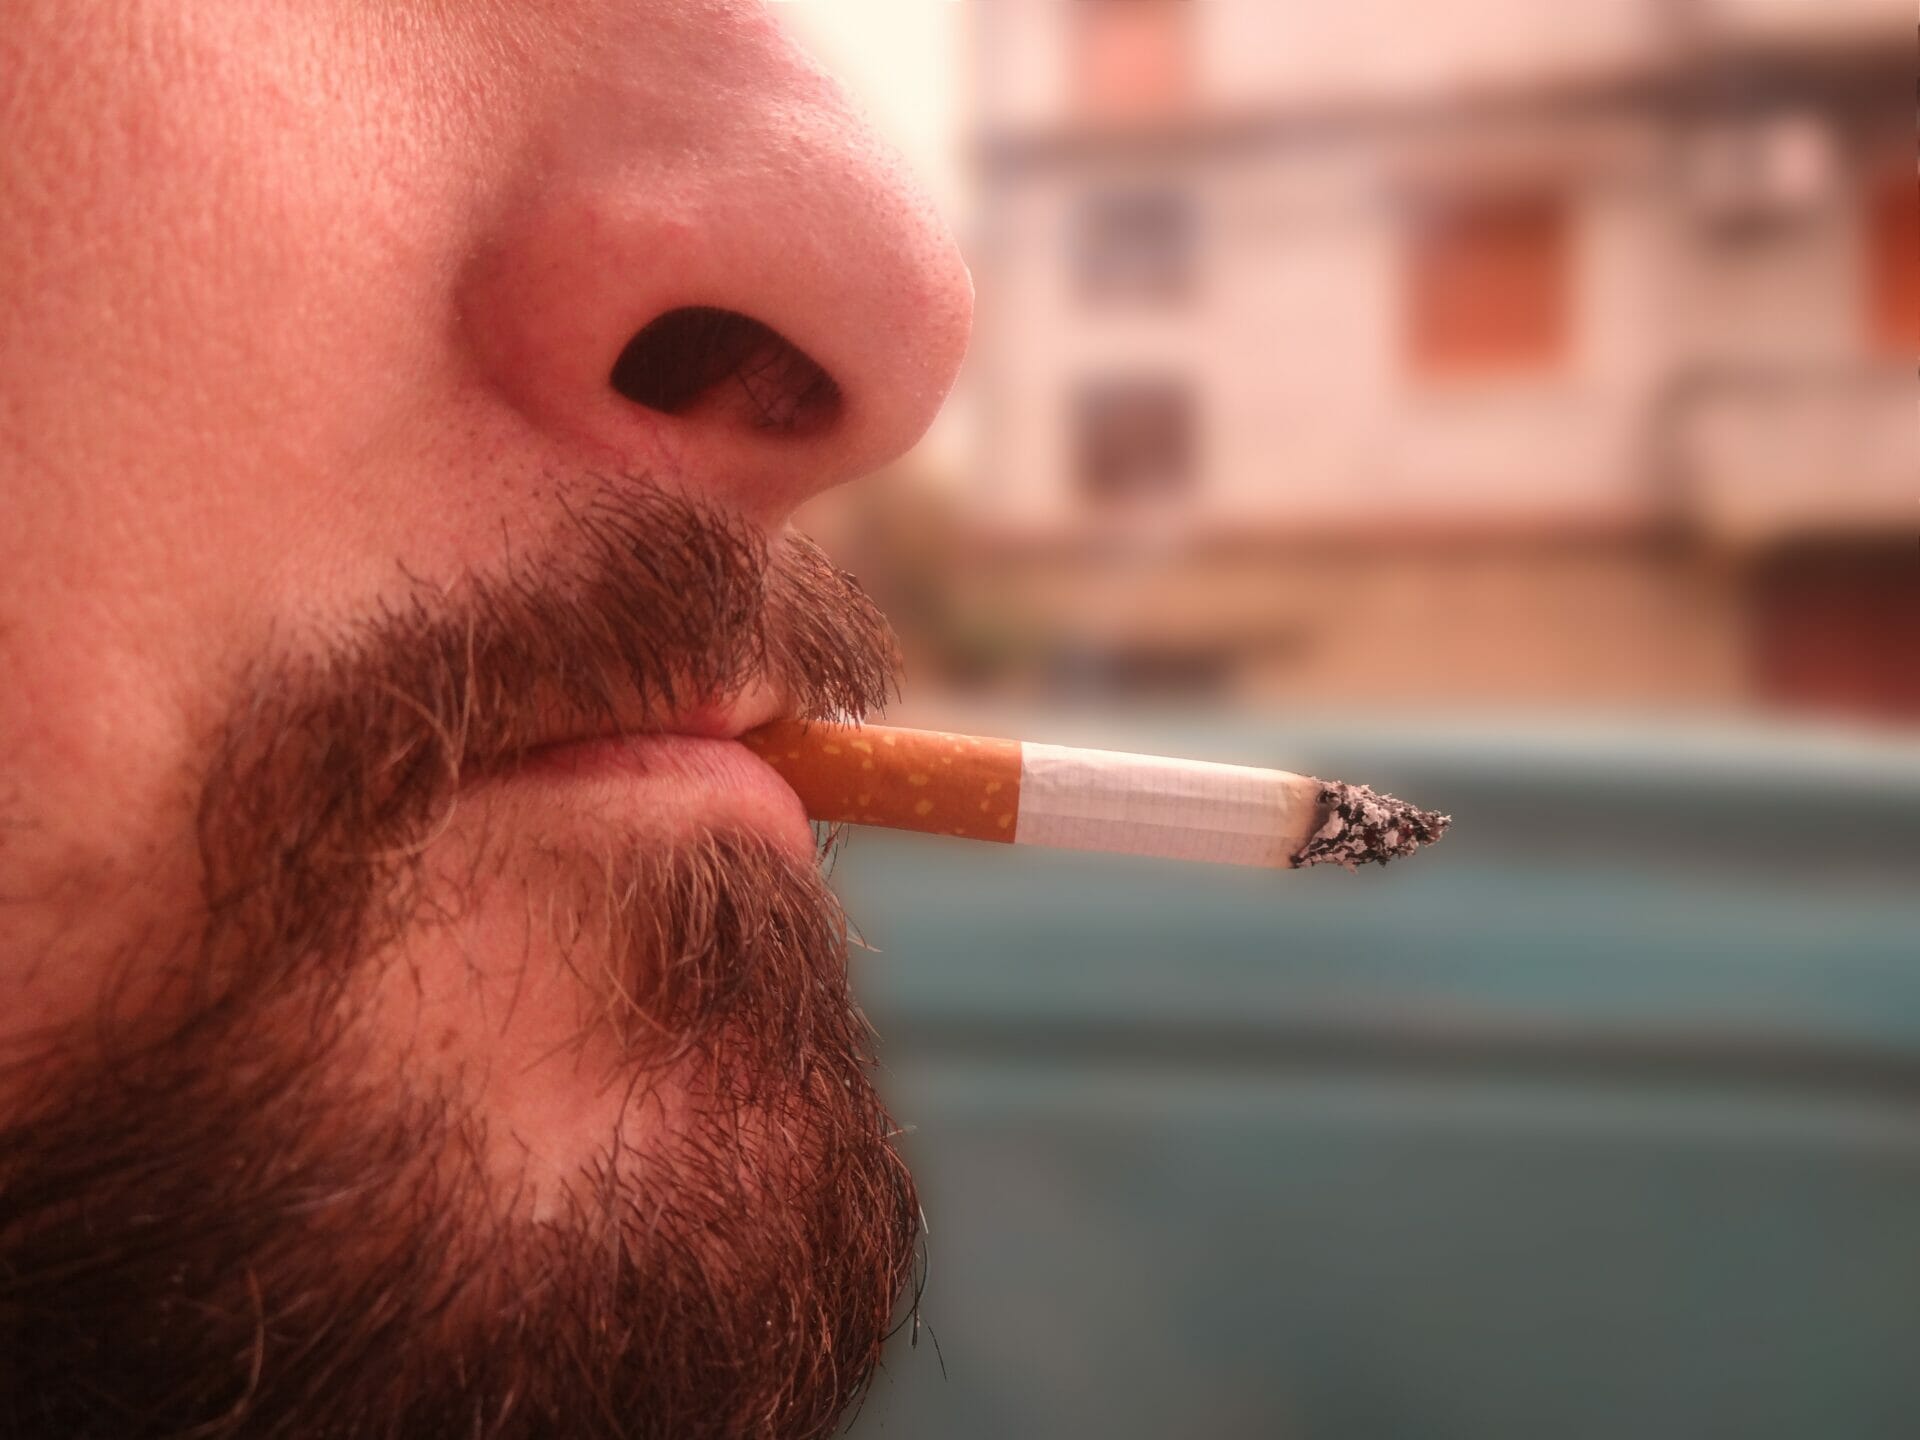 How to Get My Husband to Stop Smoking Weed: Approaches to Support and Communication